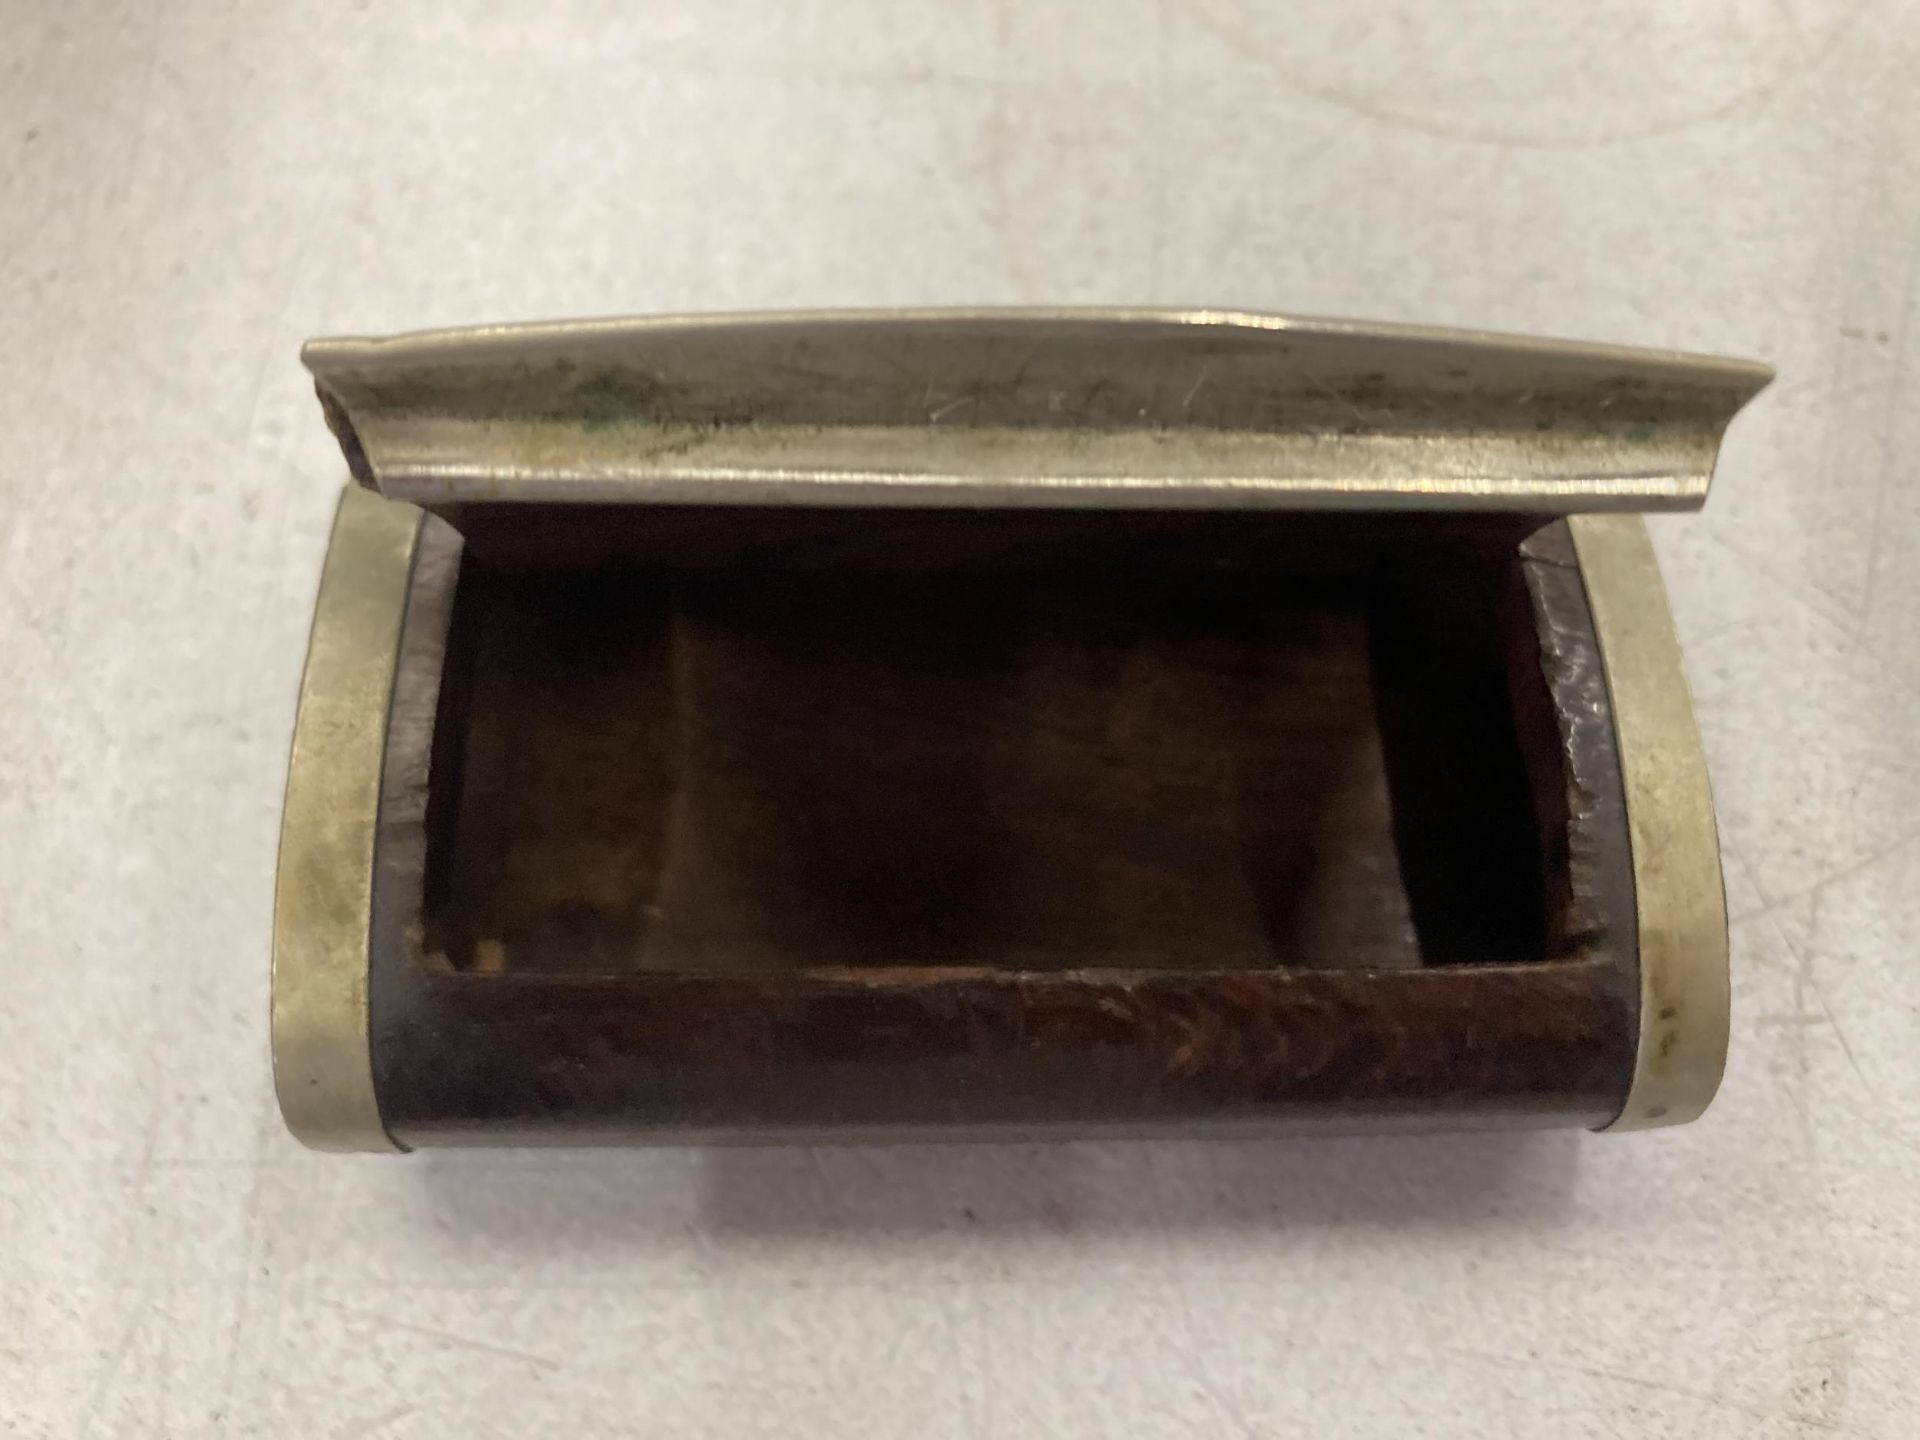 A VINTAGE BISONTINE WOODEN AND METAL BOUND SNUFF BOX - Image 2 of 3